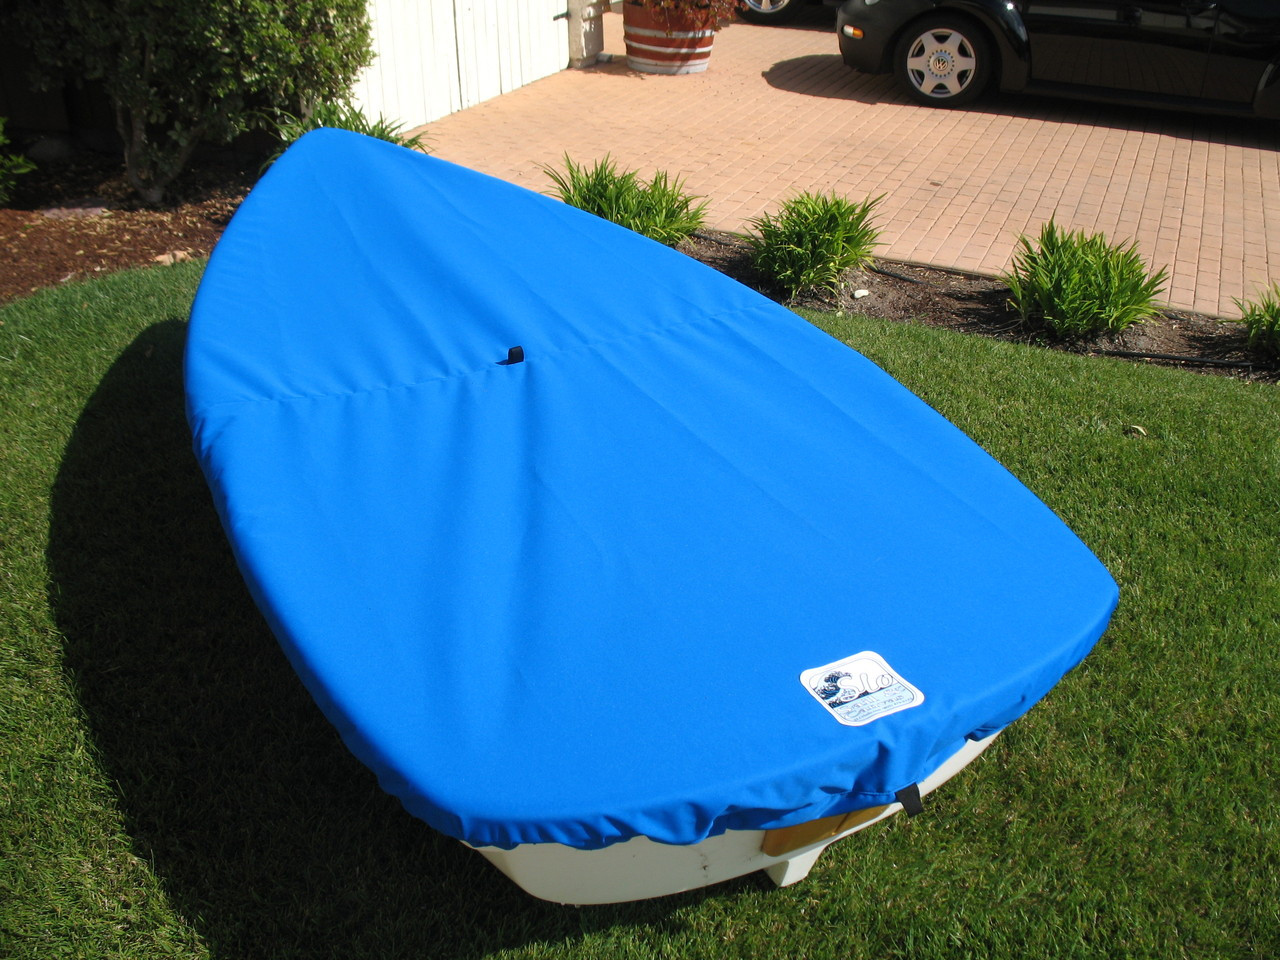 Walker Bay 8 Sailboat Top Cover made in America by skilled artisans at SLO Sail and Canvas.
